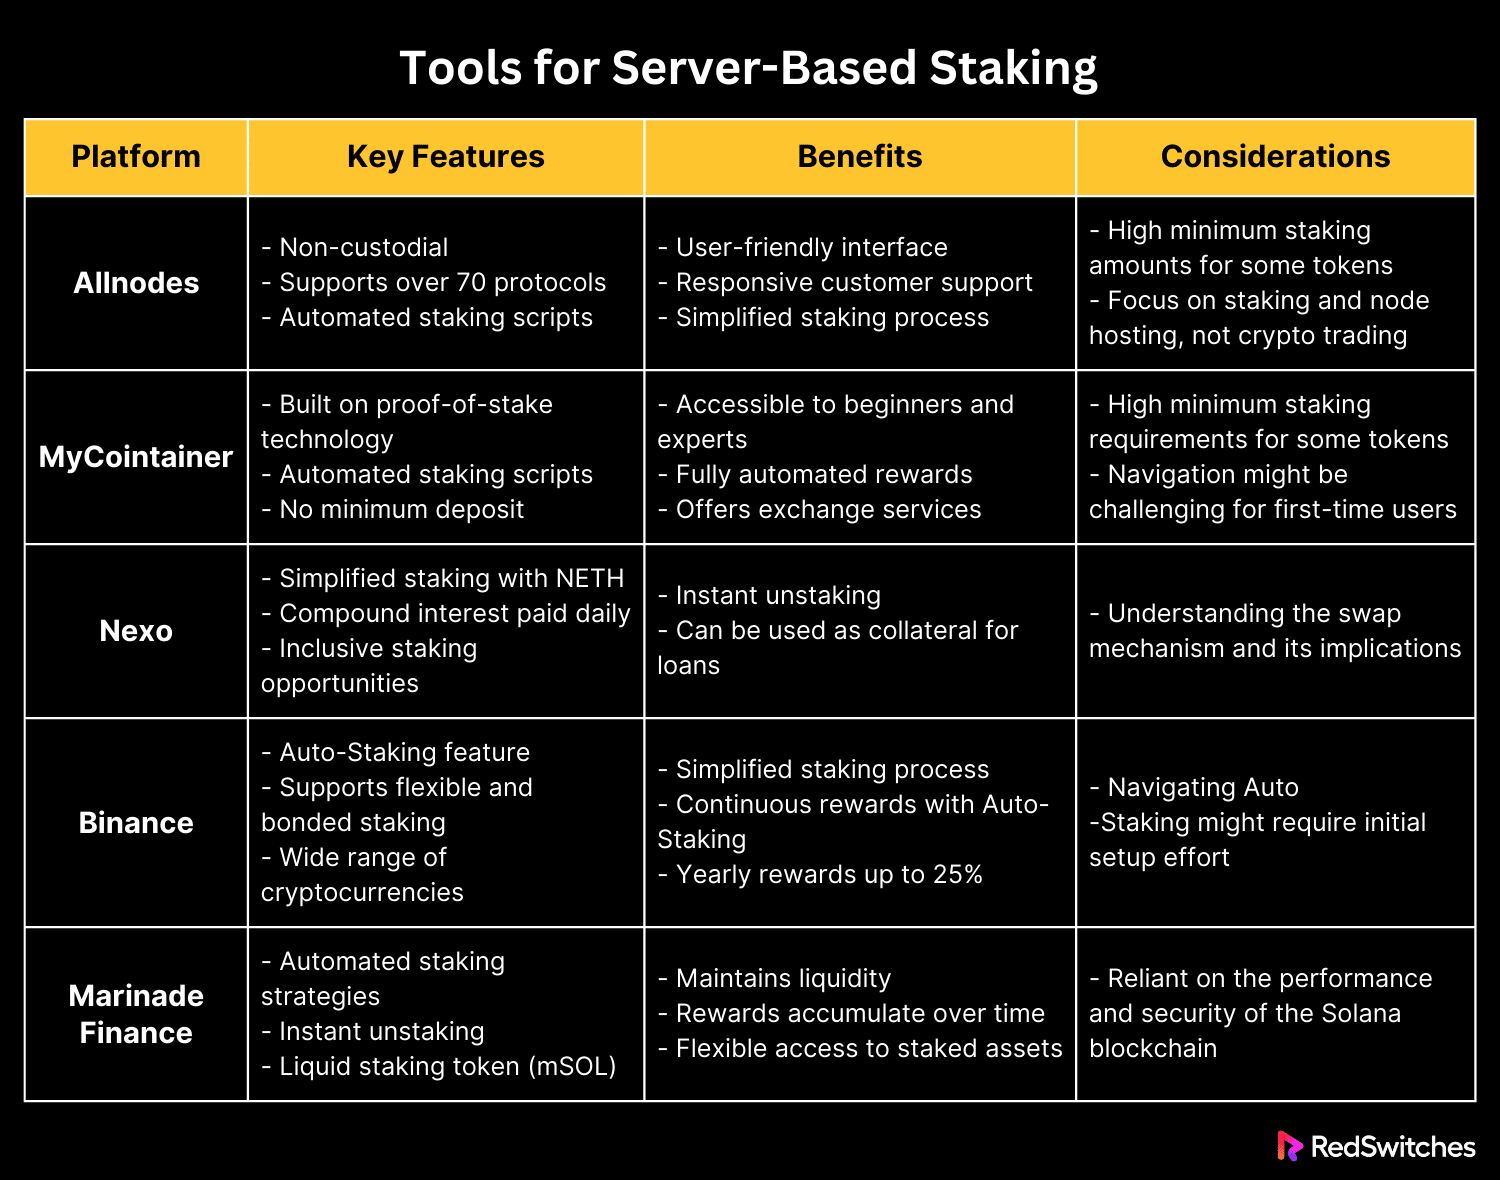 Tools for Server-Based Staking